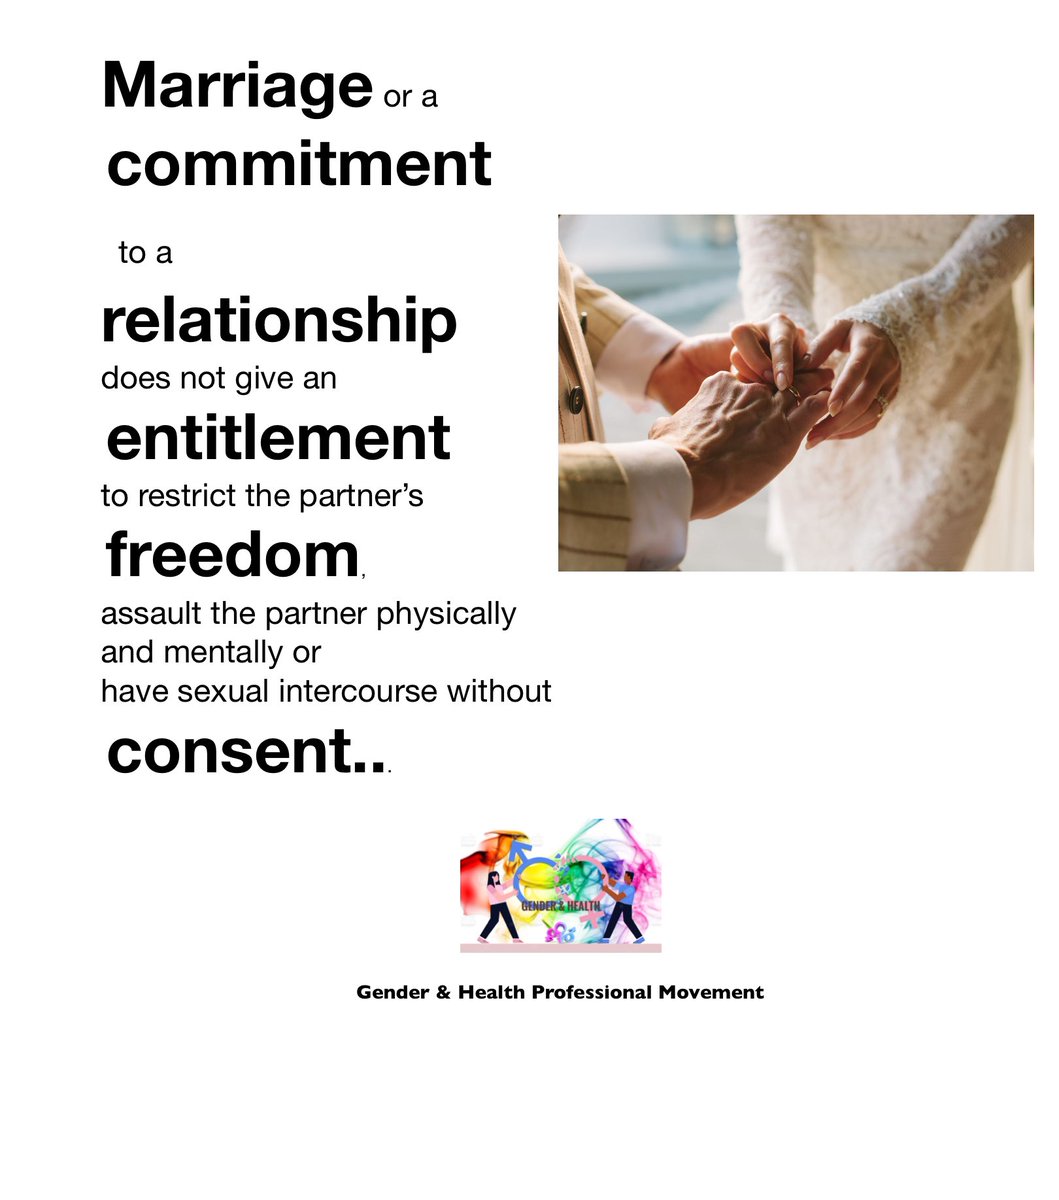 Romantic relationship is not a bond that restricts someone’s freedom and liberty. If there is existing violence and restriction, it’s up to you to decide...

#relationshipdynamics #intimacy #noviolence #respectothers #HumanRights #genderandhealth